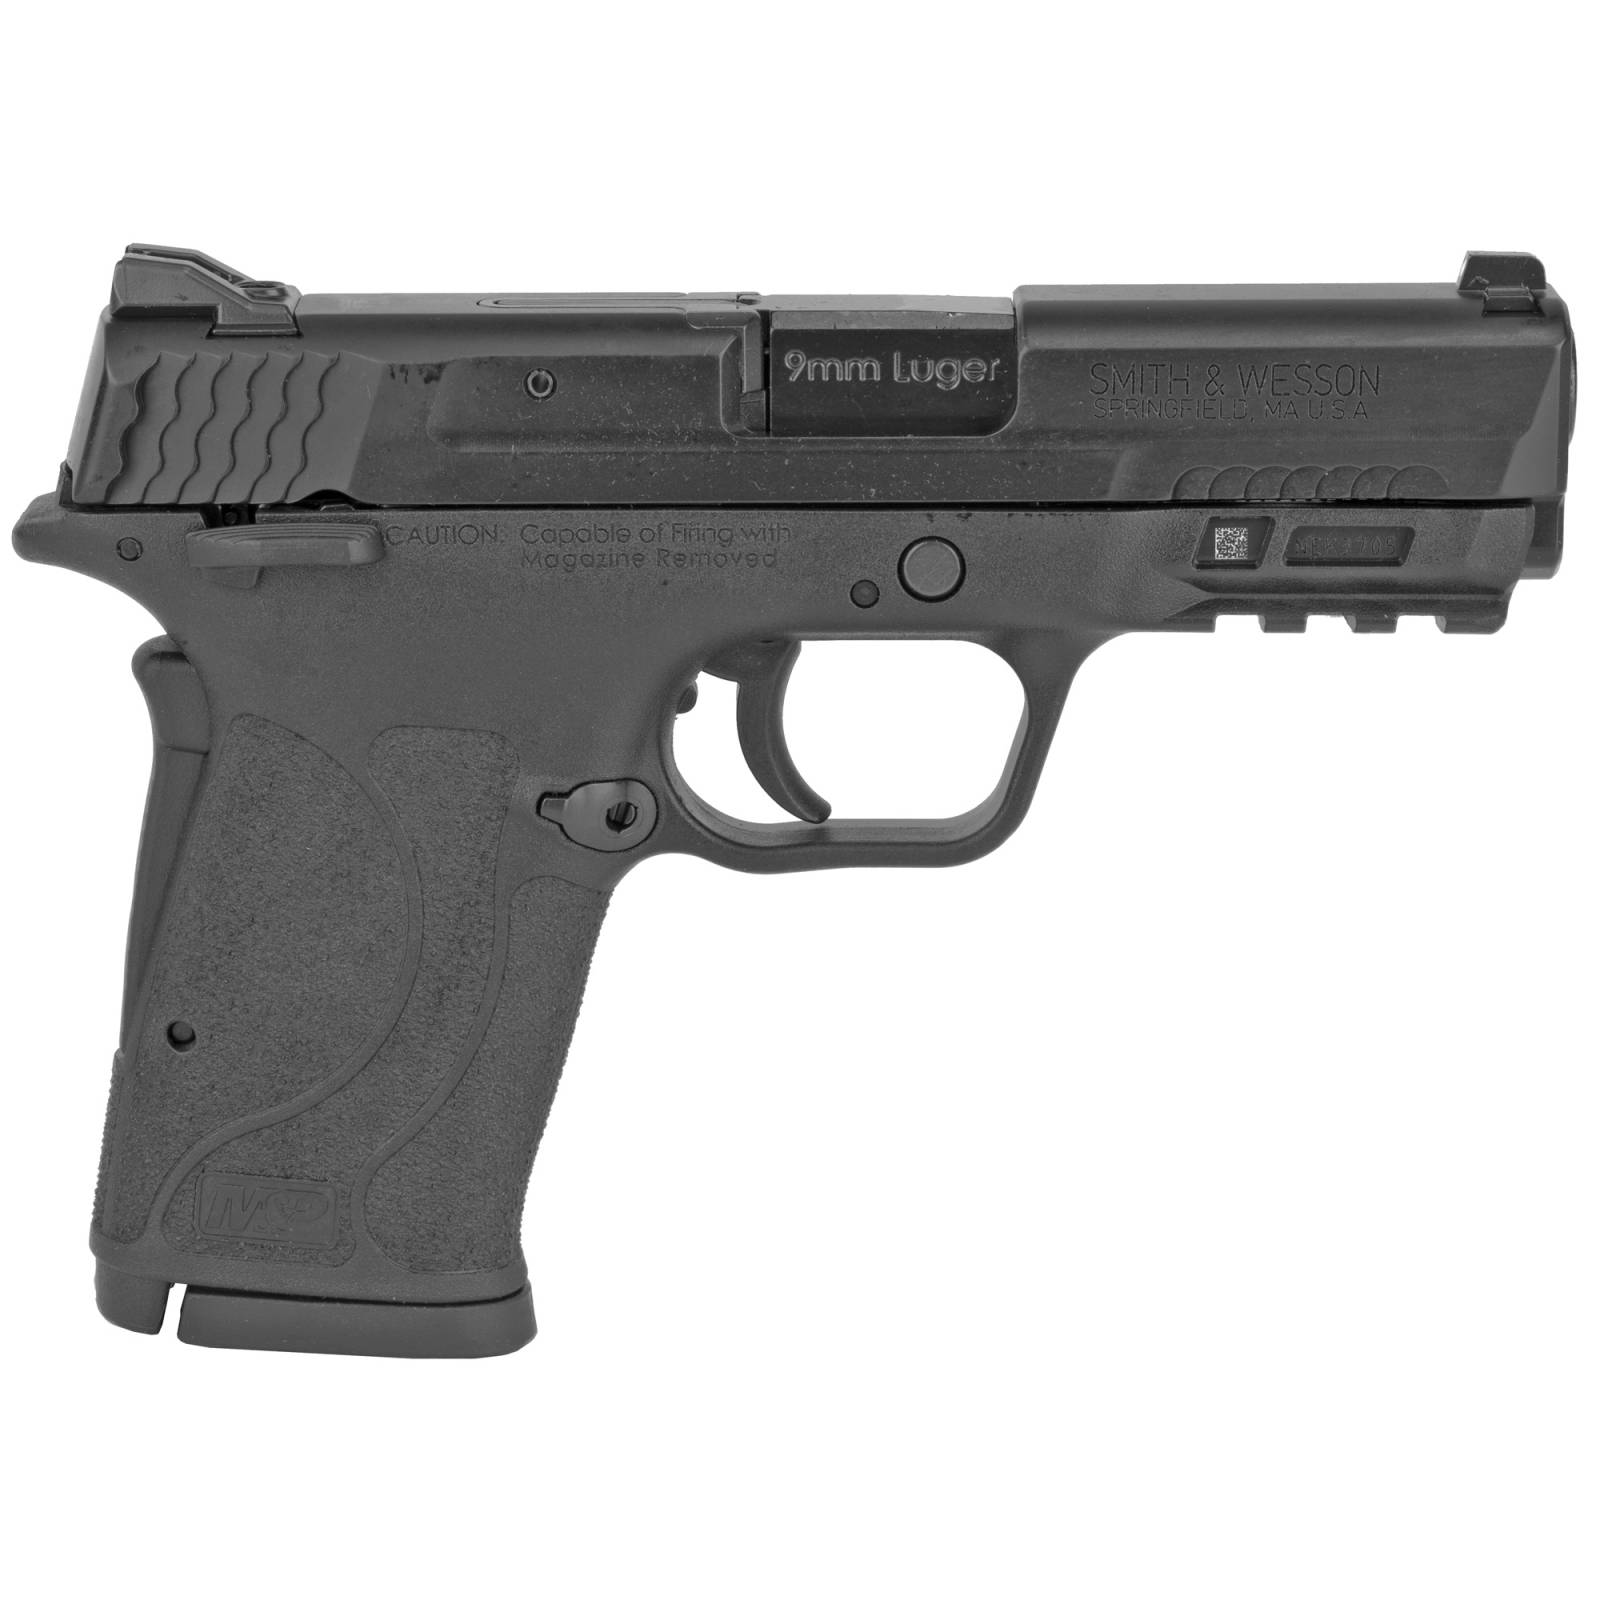 Smith and Wesson M&P Shield EZ M2.0 9mm 3.68in Barrel 8+1 Round Capacity